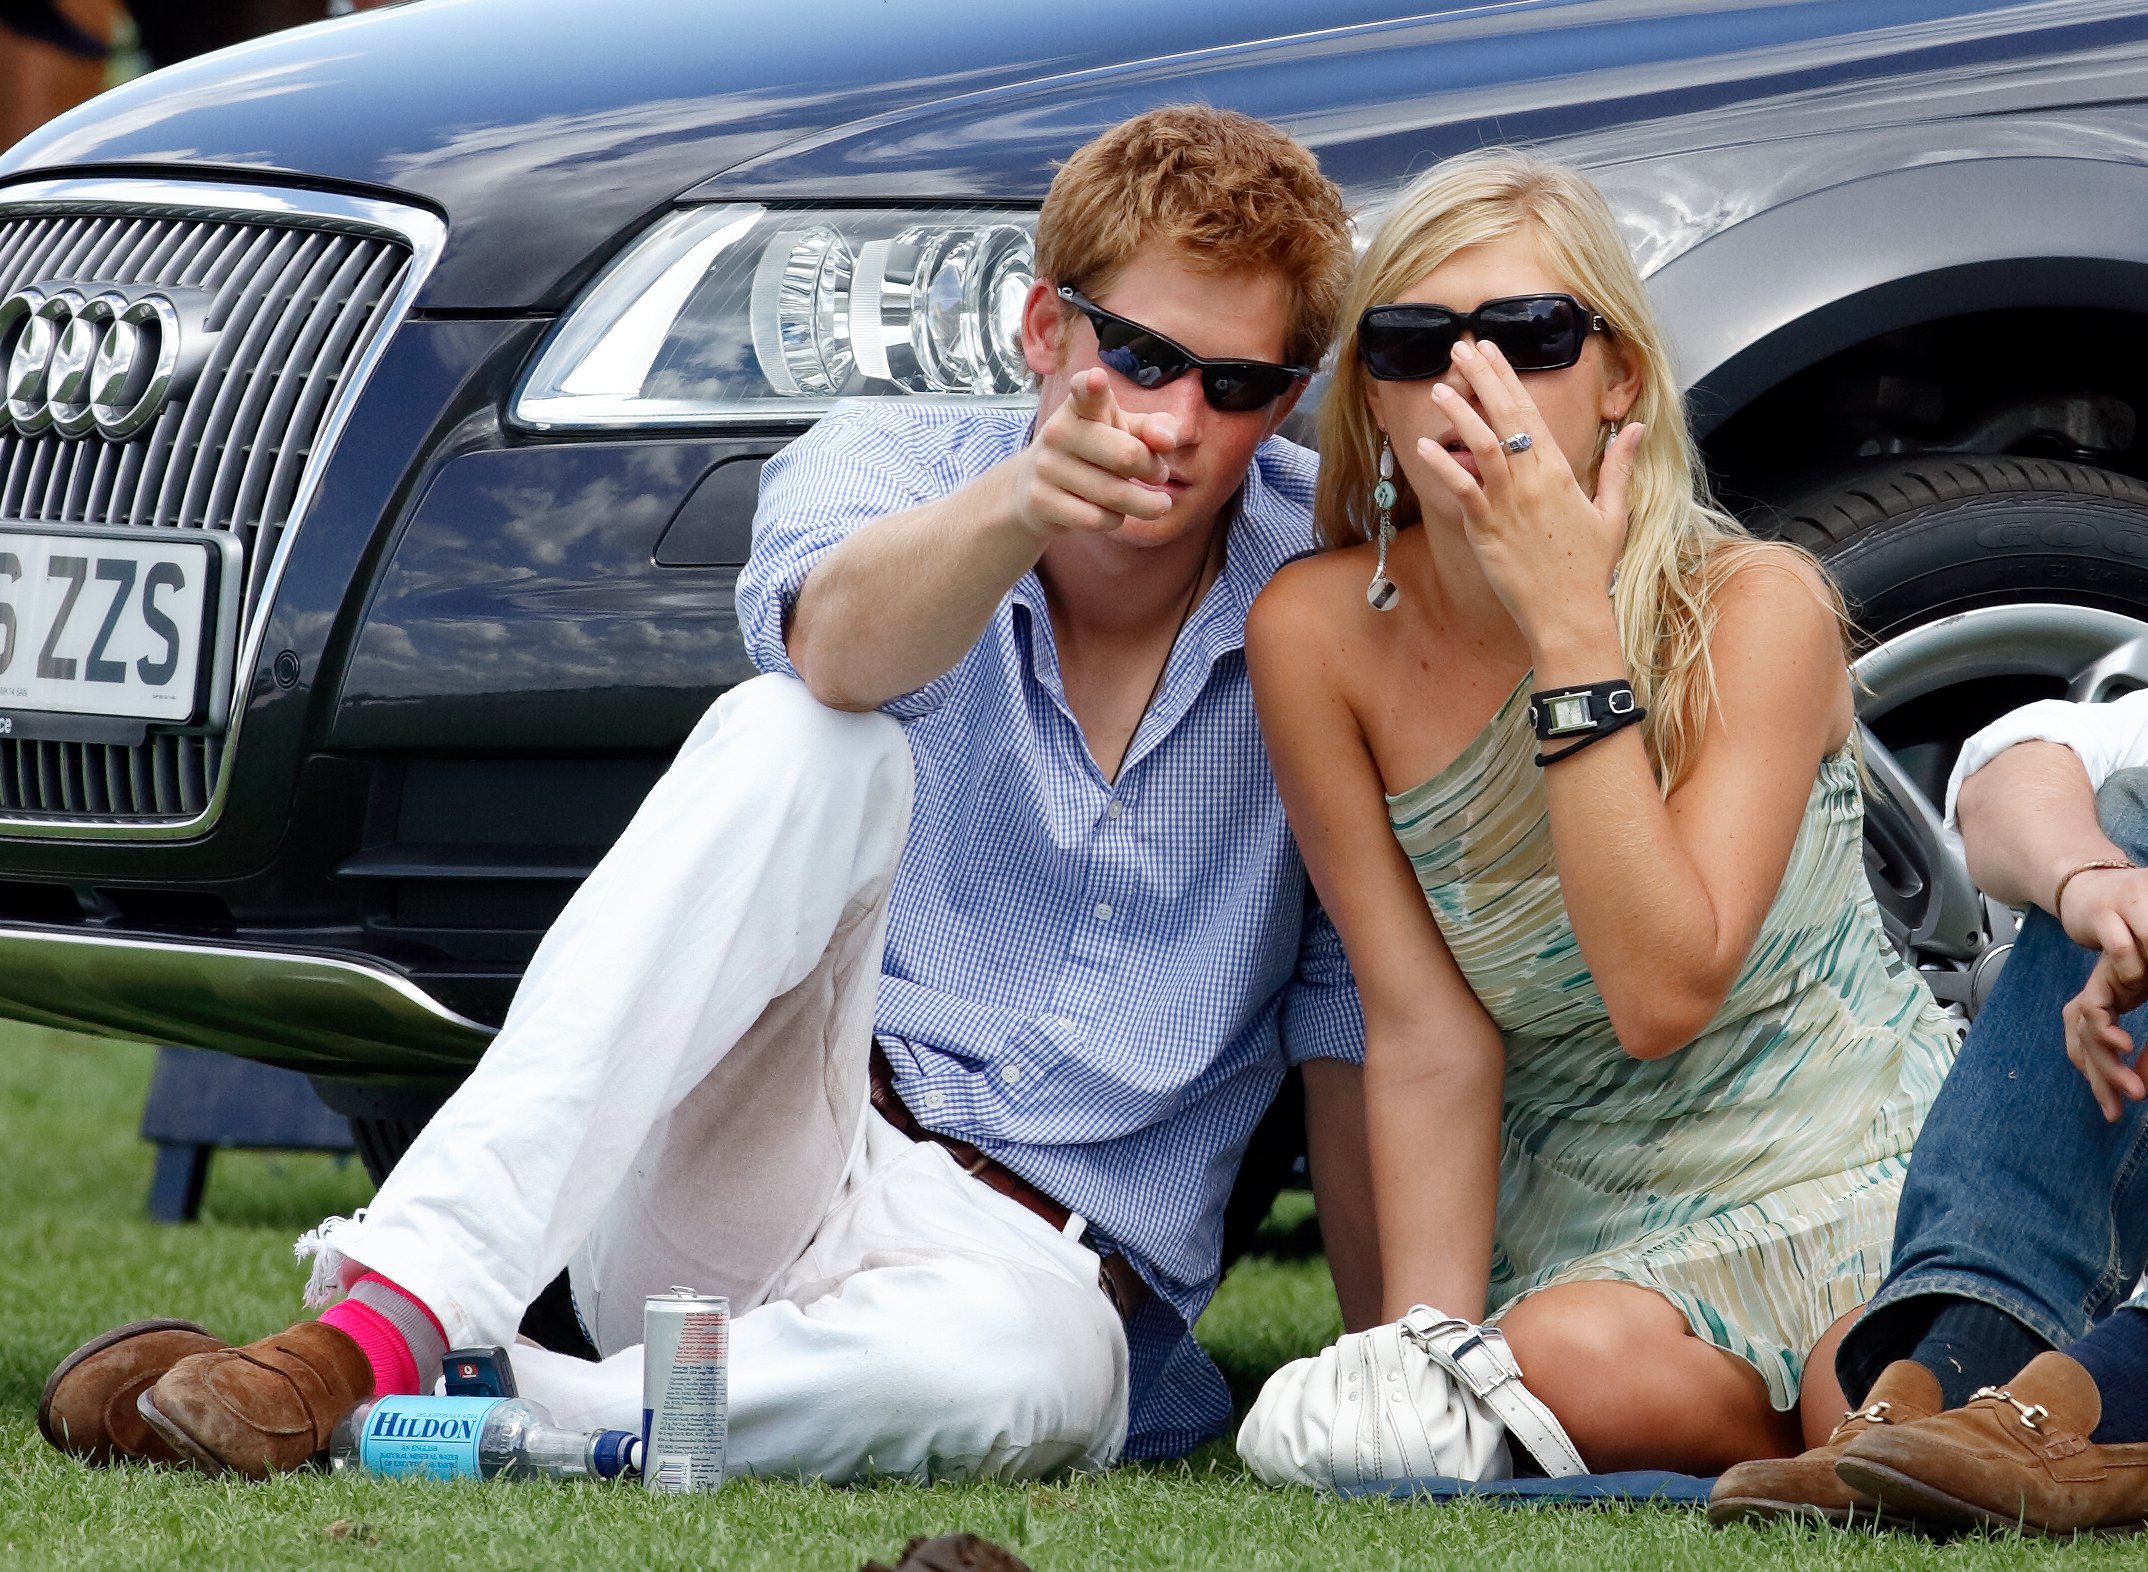 Prince Harry and Chelsy Davy attend the Cartier International Polo Match at Guards Polo Club, Smith's Lawn on July 30, 2006 in Egham, England.